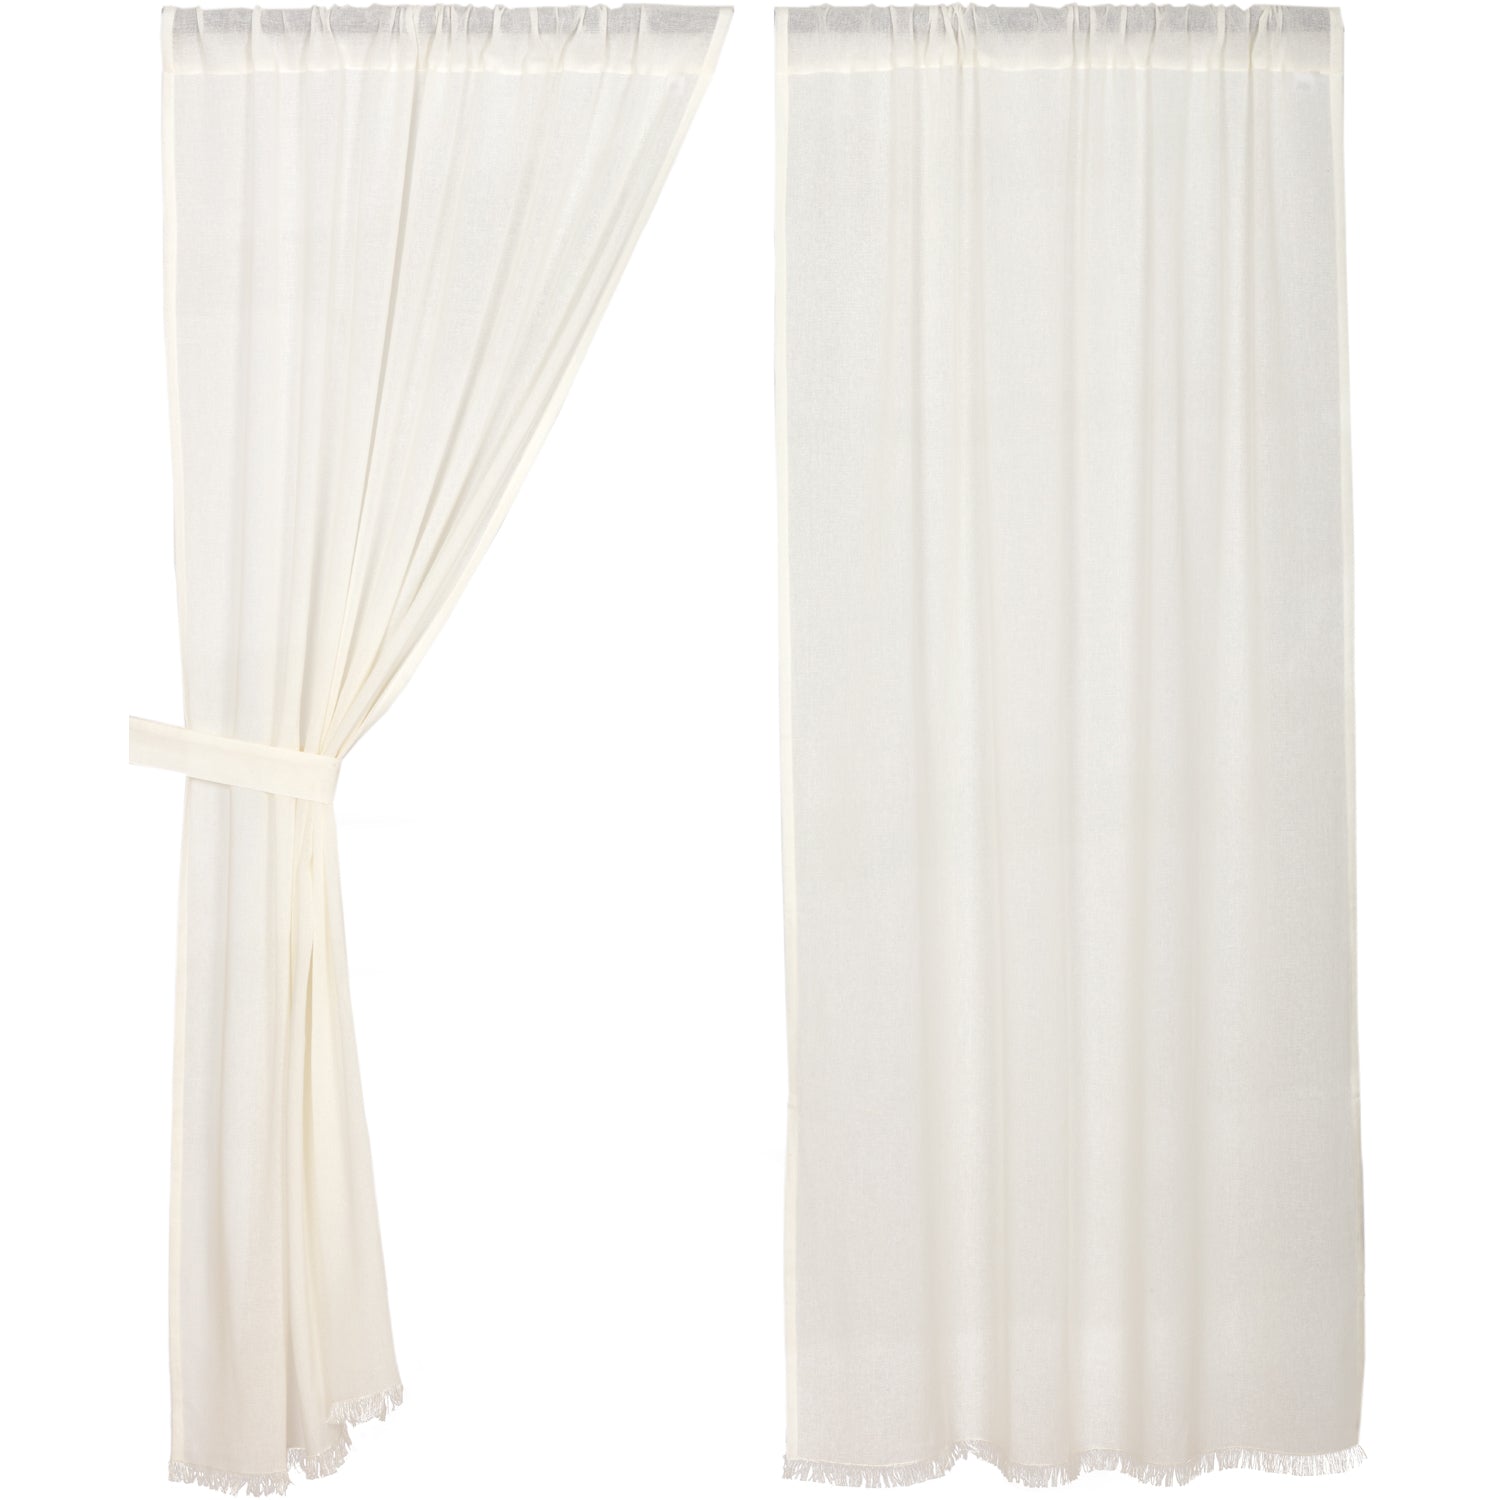 April & Olive Tobacco Cloth Antique White Short Panel Fringed Set of 2 63x36 By VHC Brands